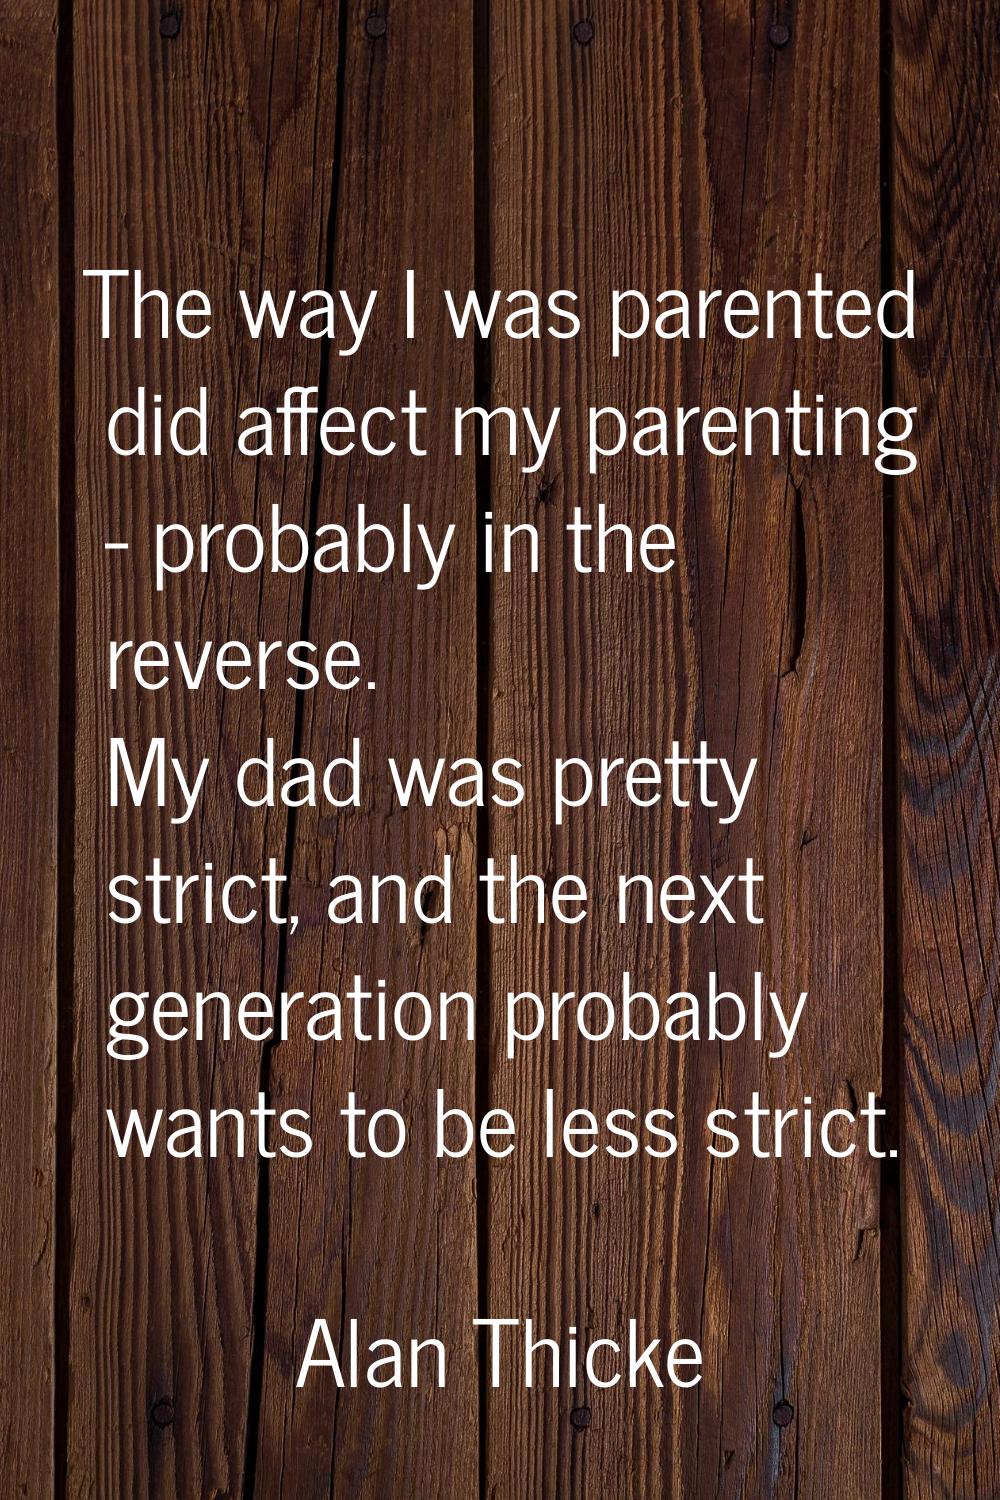 The way I was parented did affect my parenting - probably in the reverse. My dad was pretty strict,